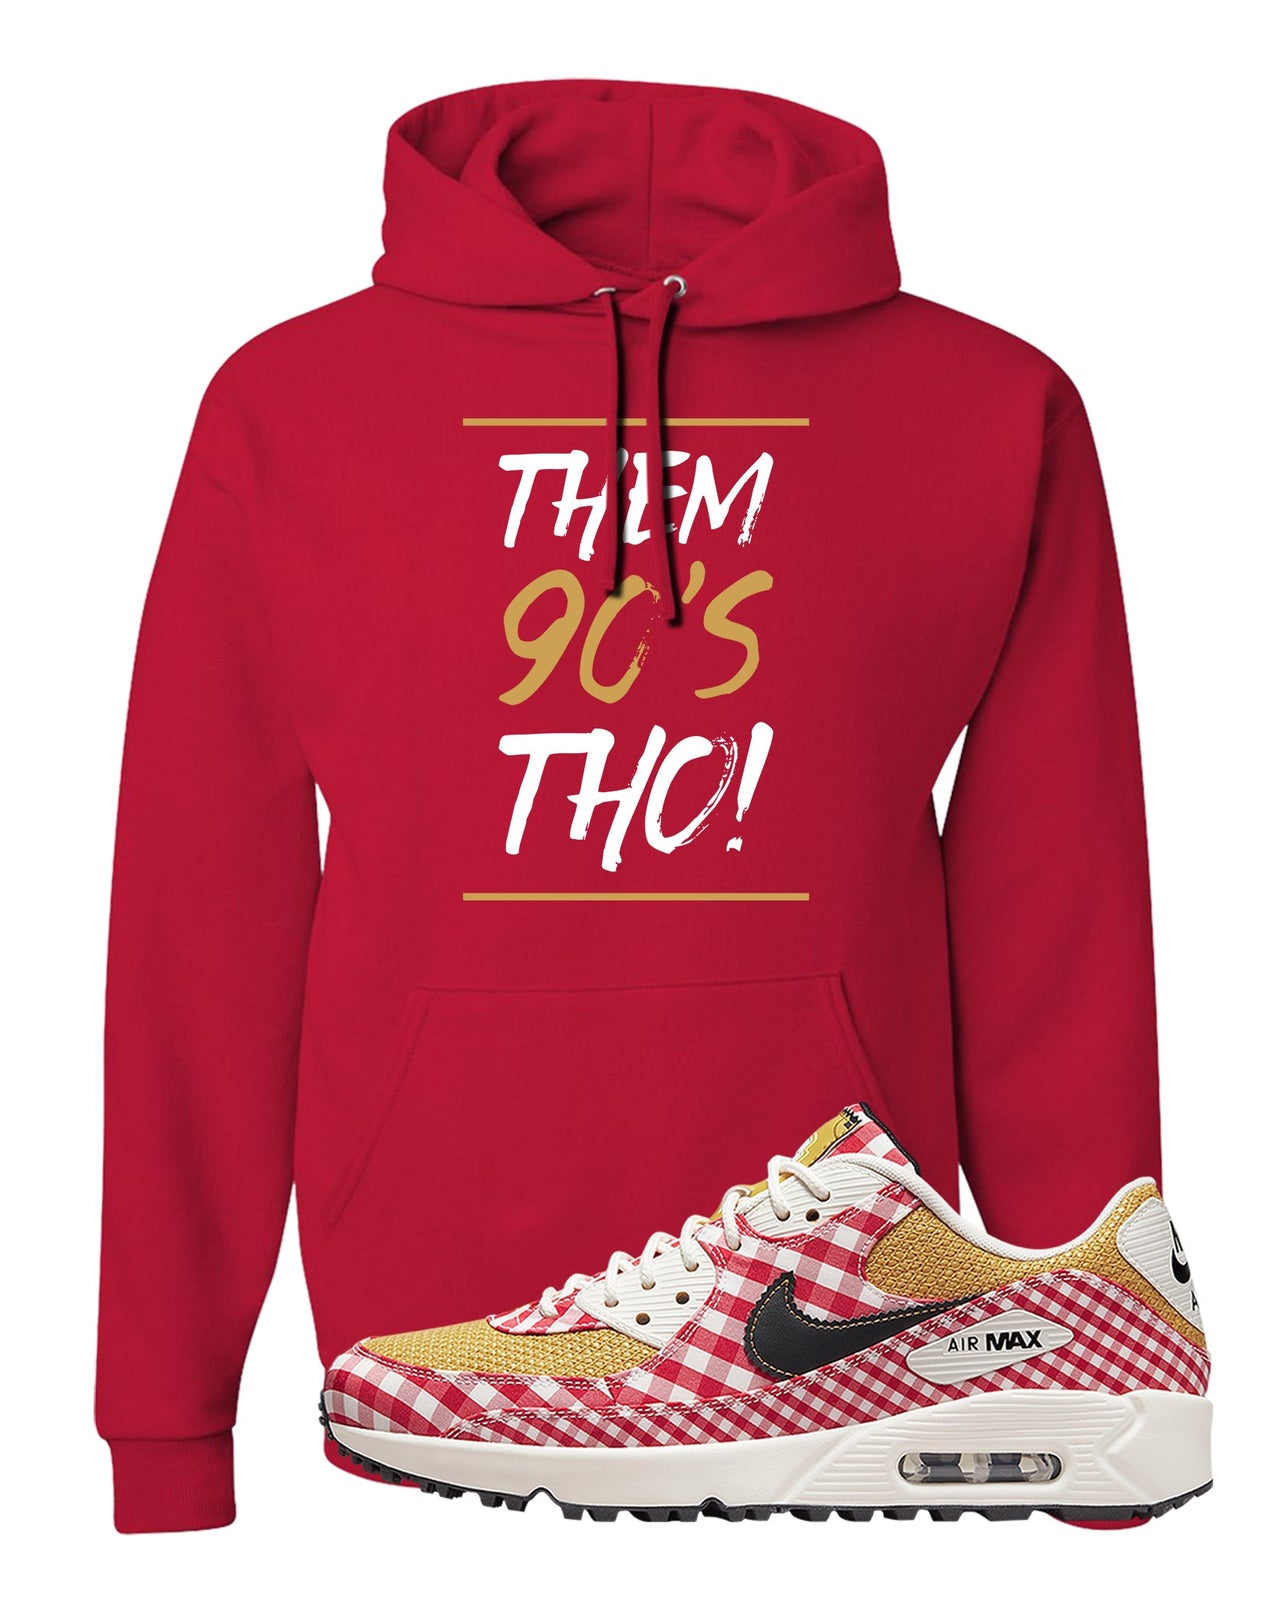 Picnic Golf 90s Hoodie | Them 90's Tho, Red